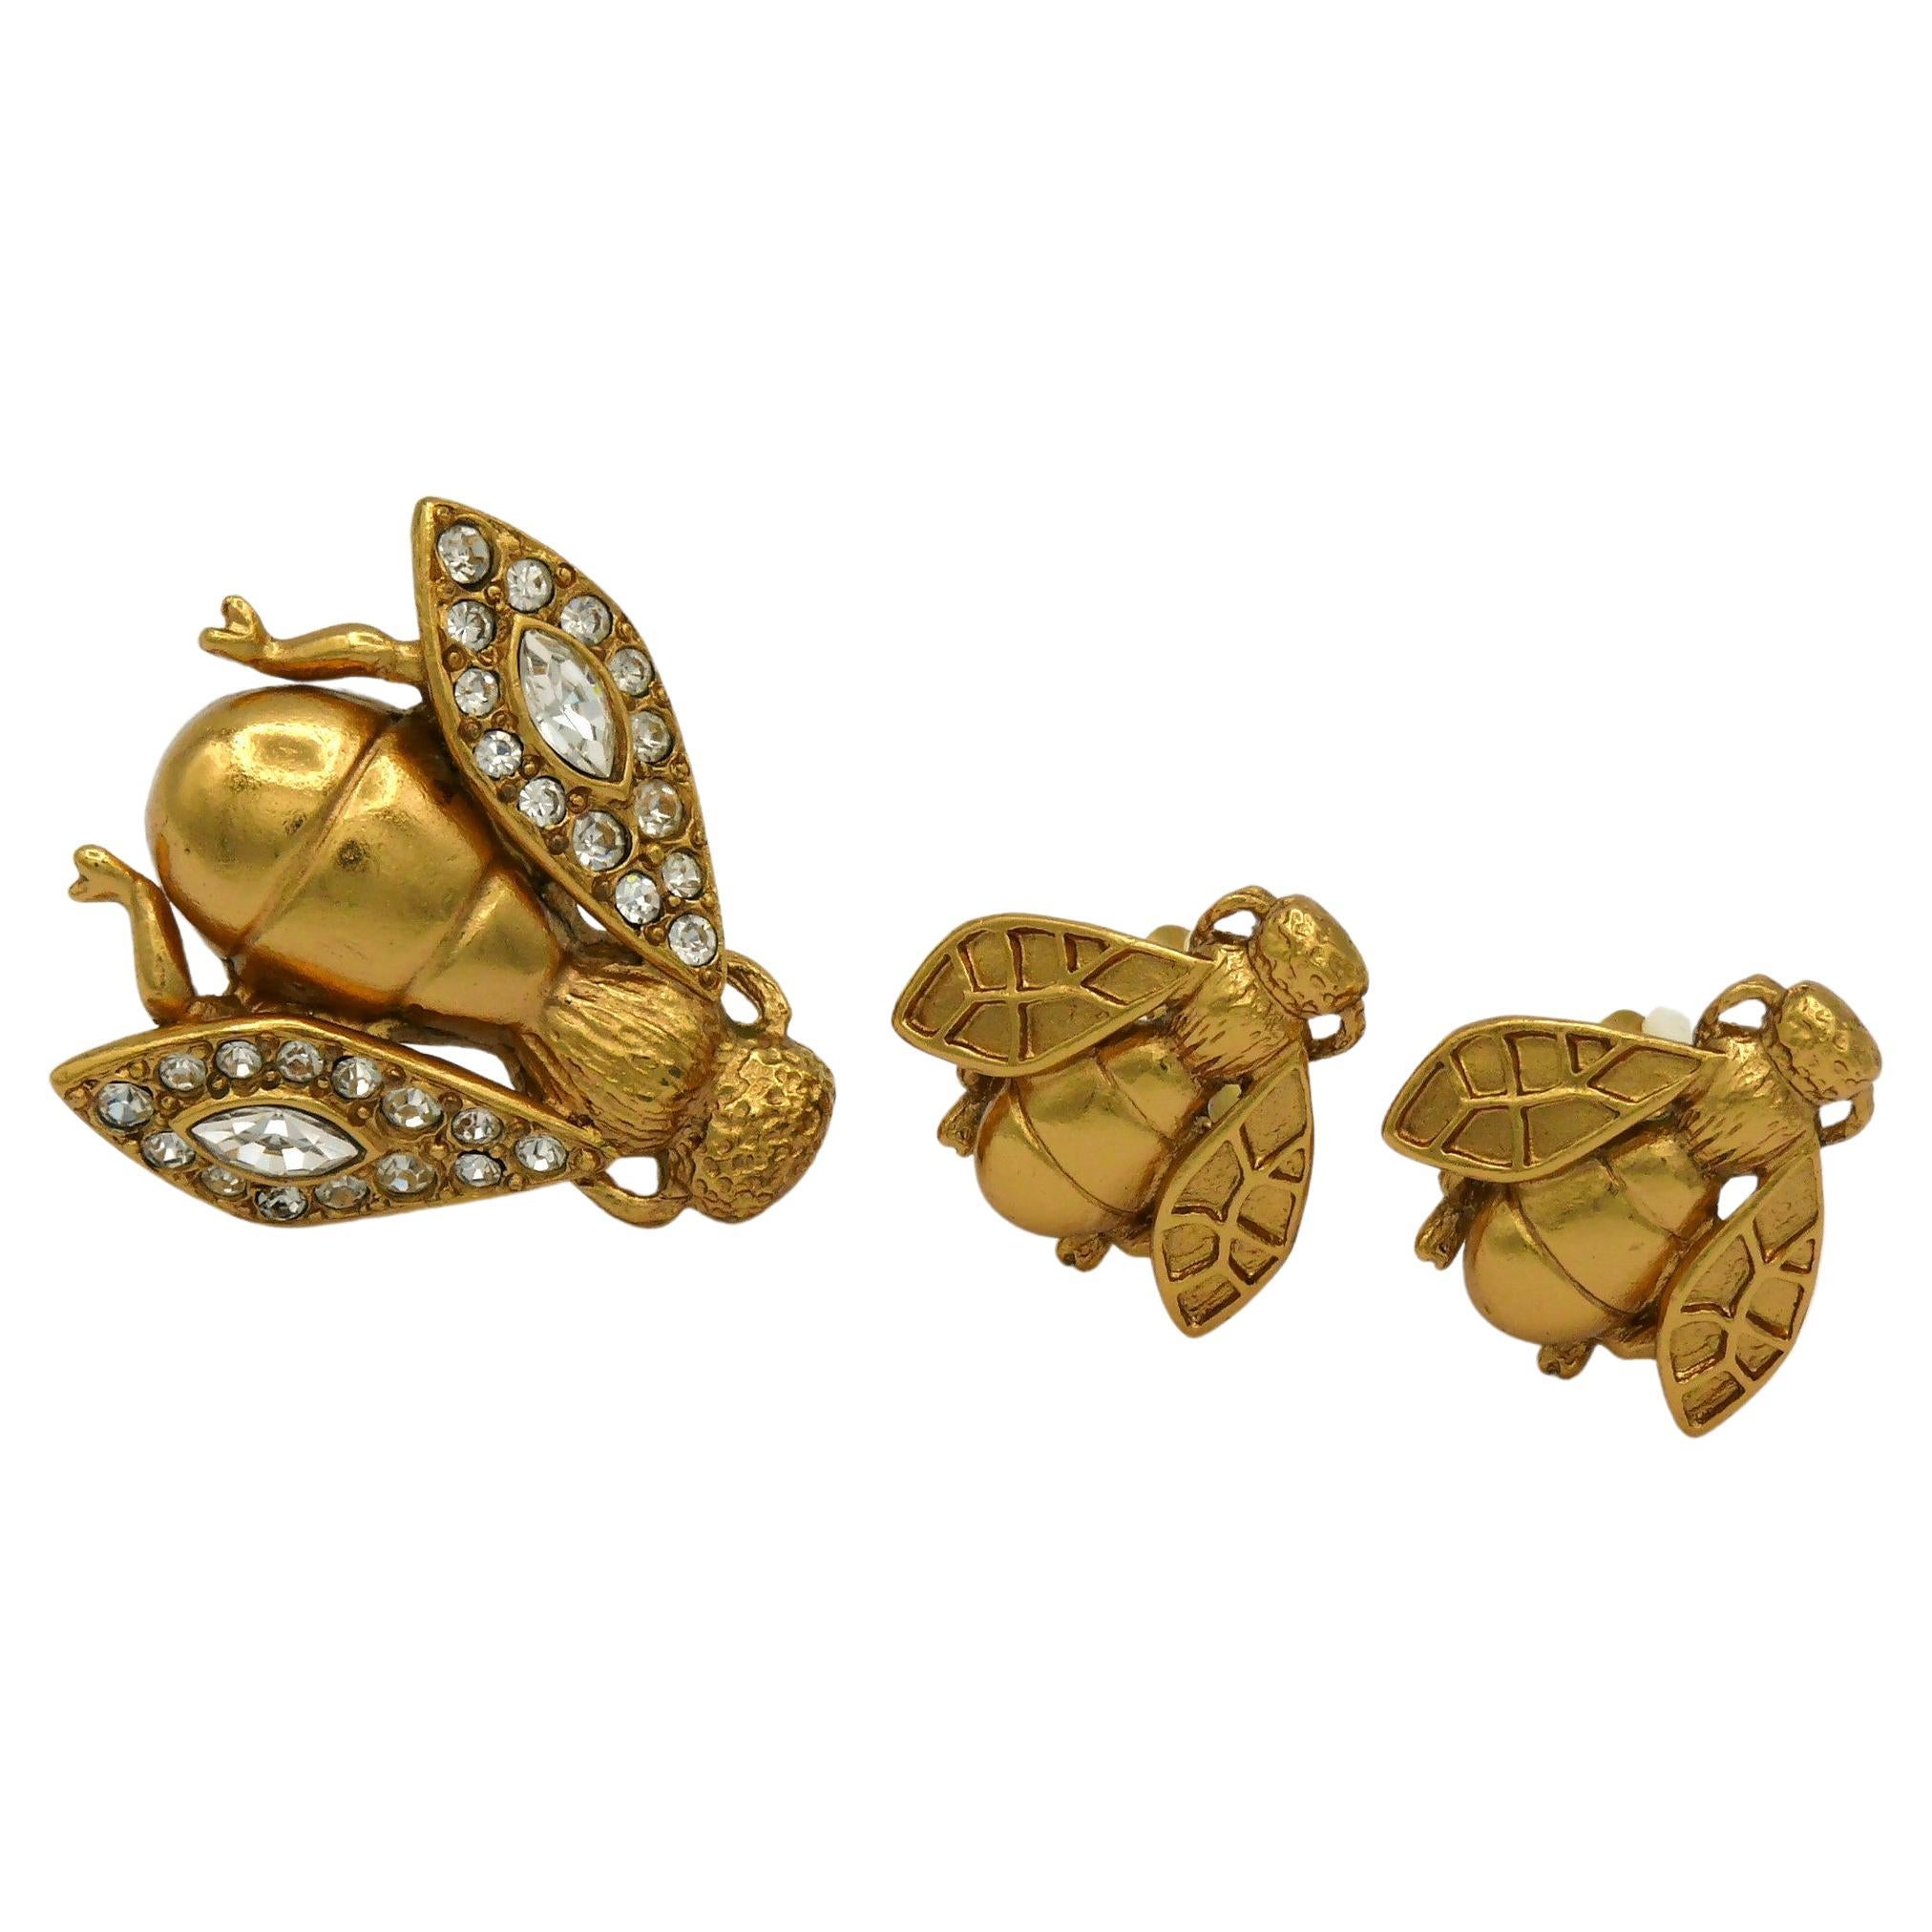 CHRISTIAN DIOR Boutique Iconic Bee Brooch and Clip-On Earrings (unmarked) For Sale